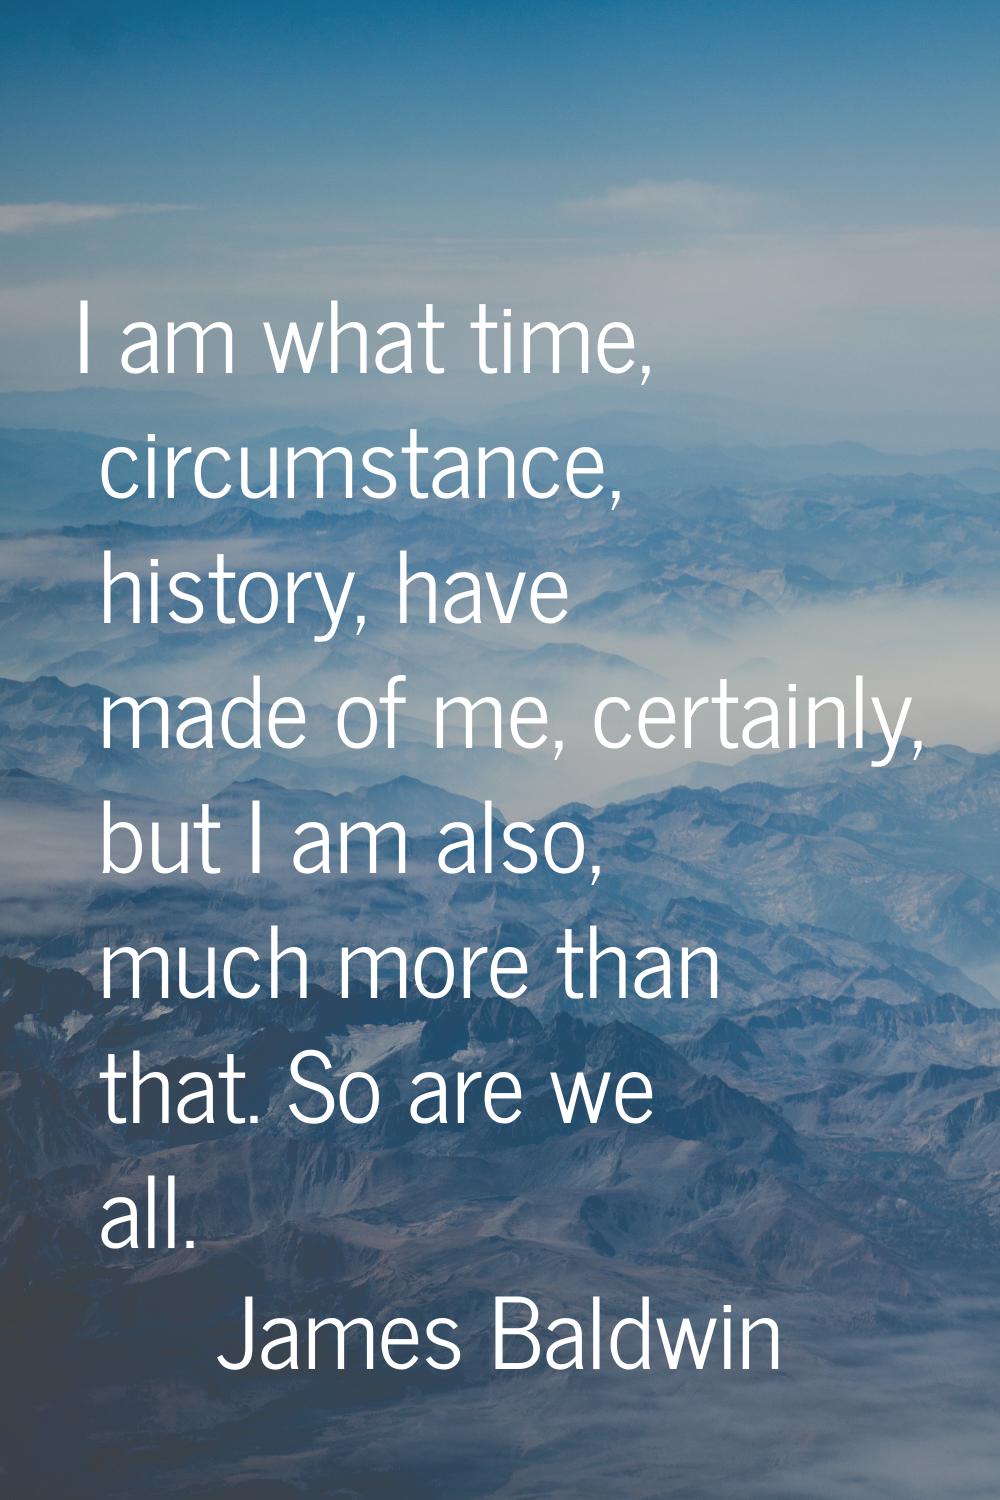 I am what time, circumstance, history, have made of me, certainly, but I am also, much more than th